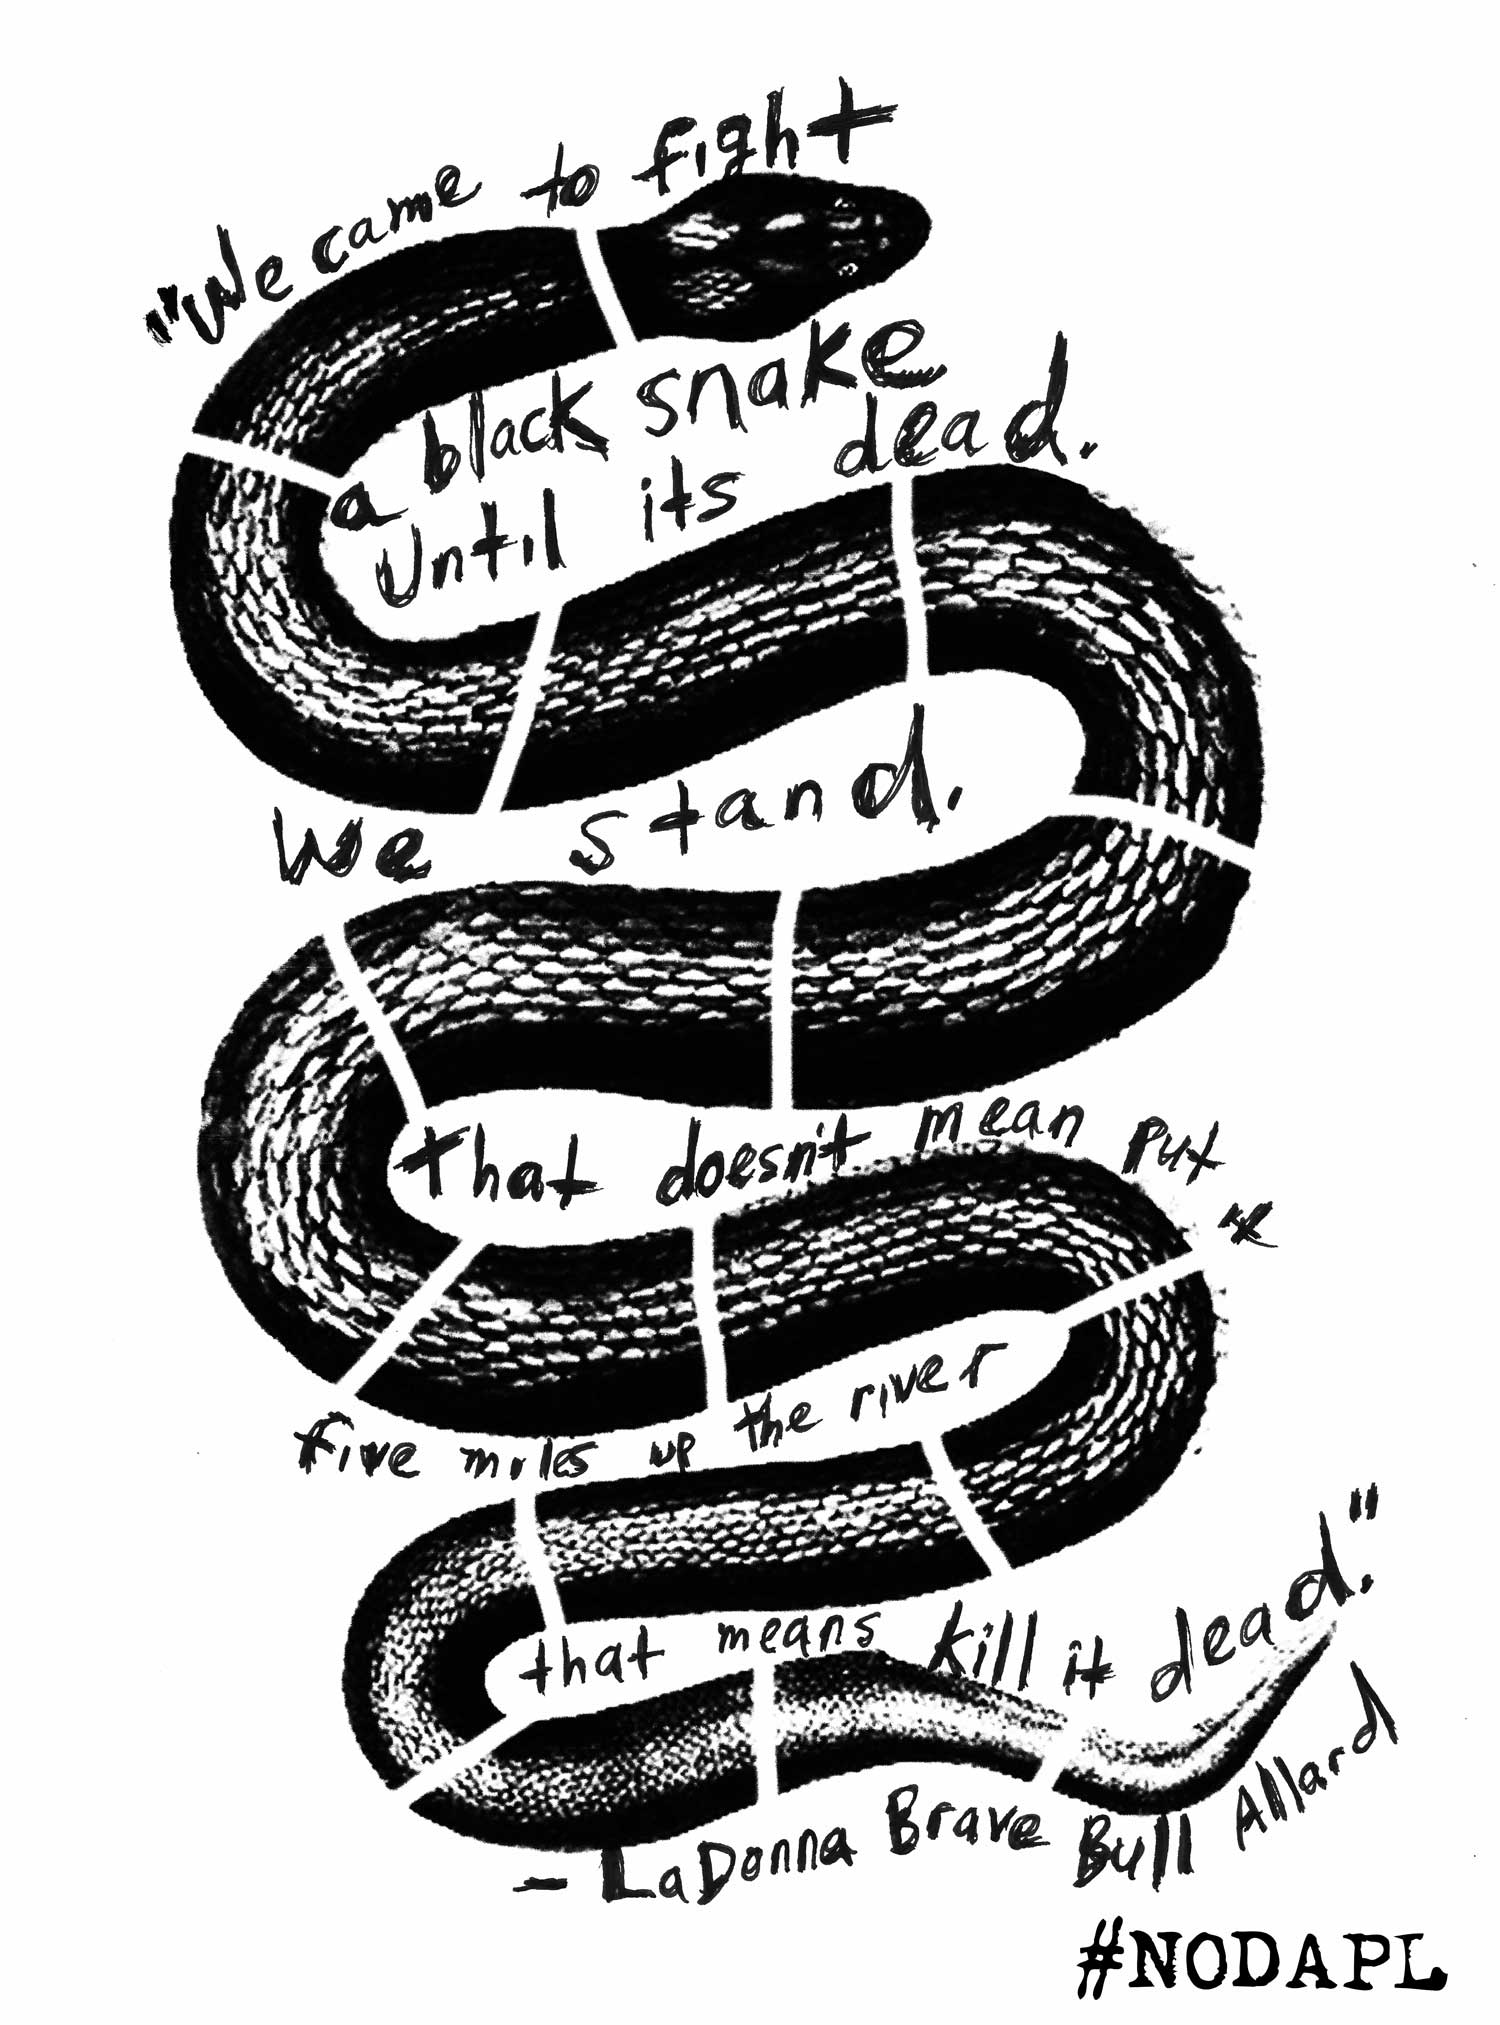 Justseeds | We Came to Fight A Black Snake